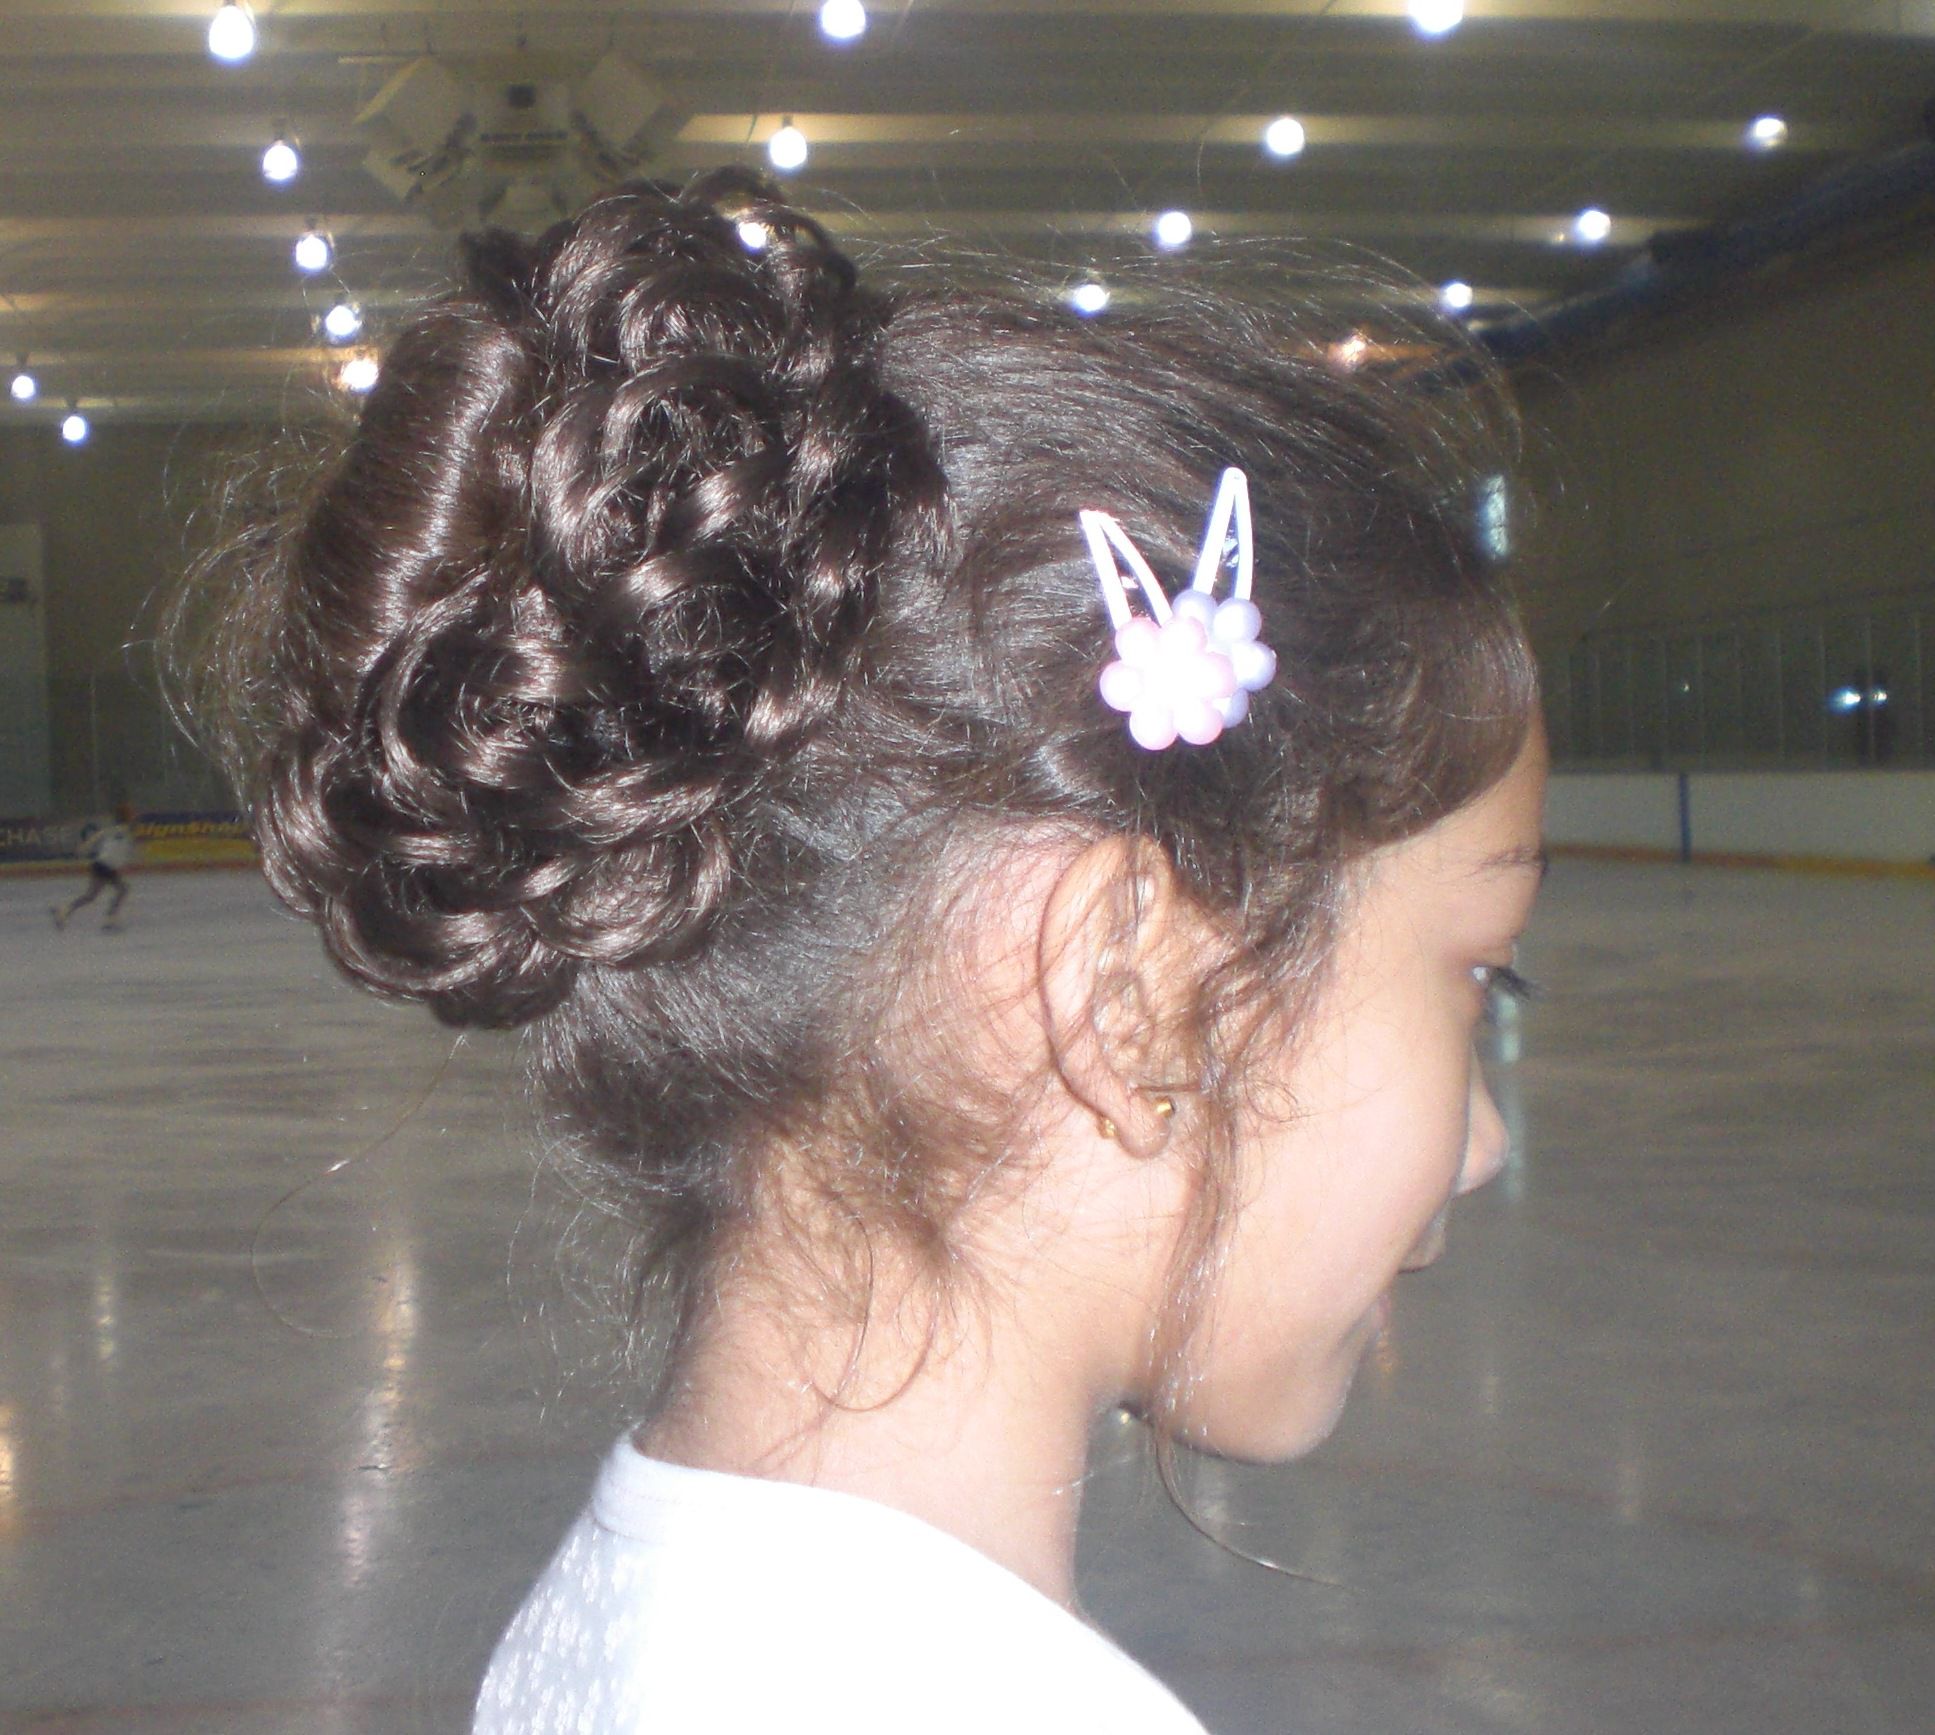 How To Wear Your Hair For Figure Skating